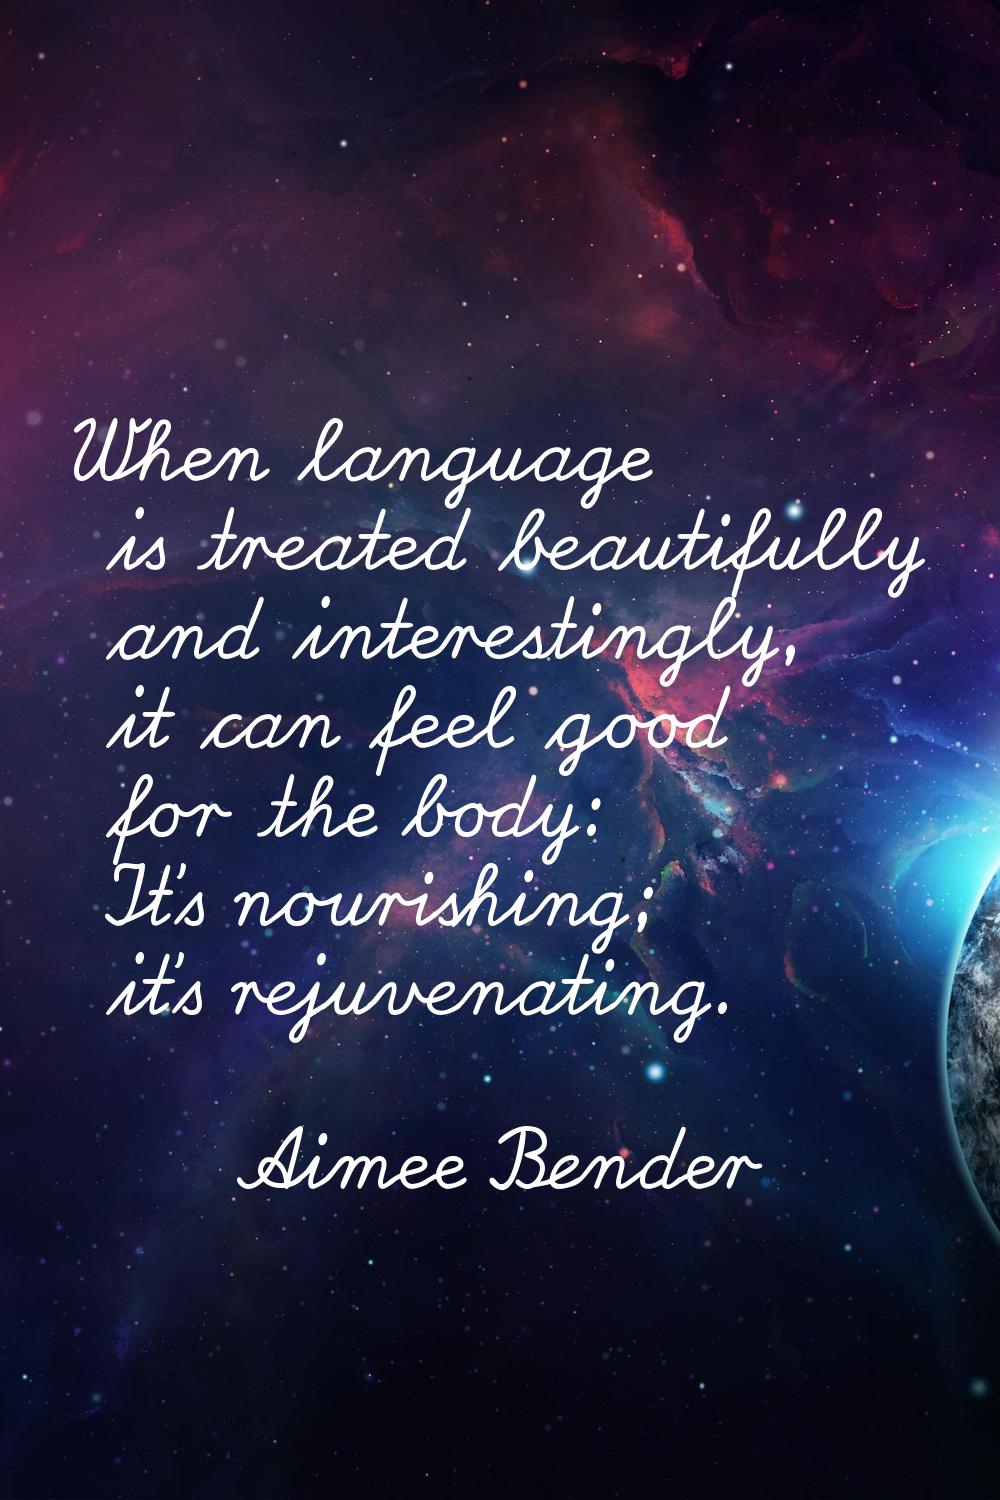 When language is treated beautifully and interestingly, it can feel good for the body: It's nourish